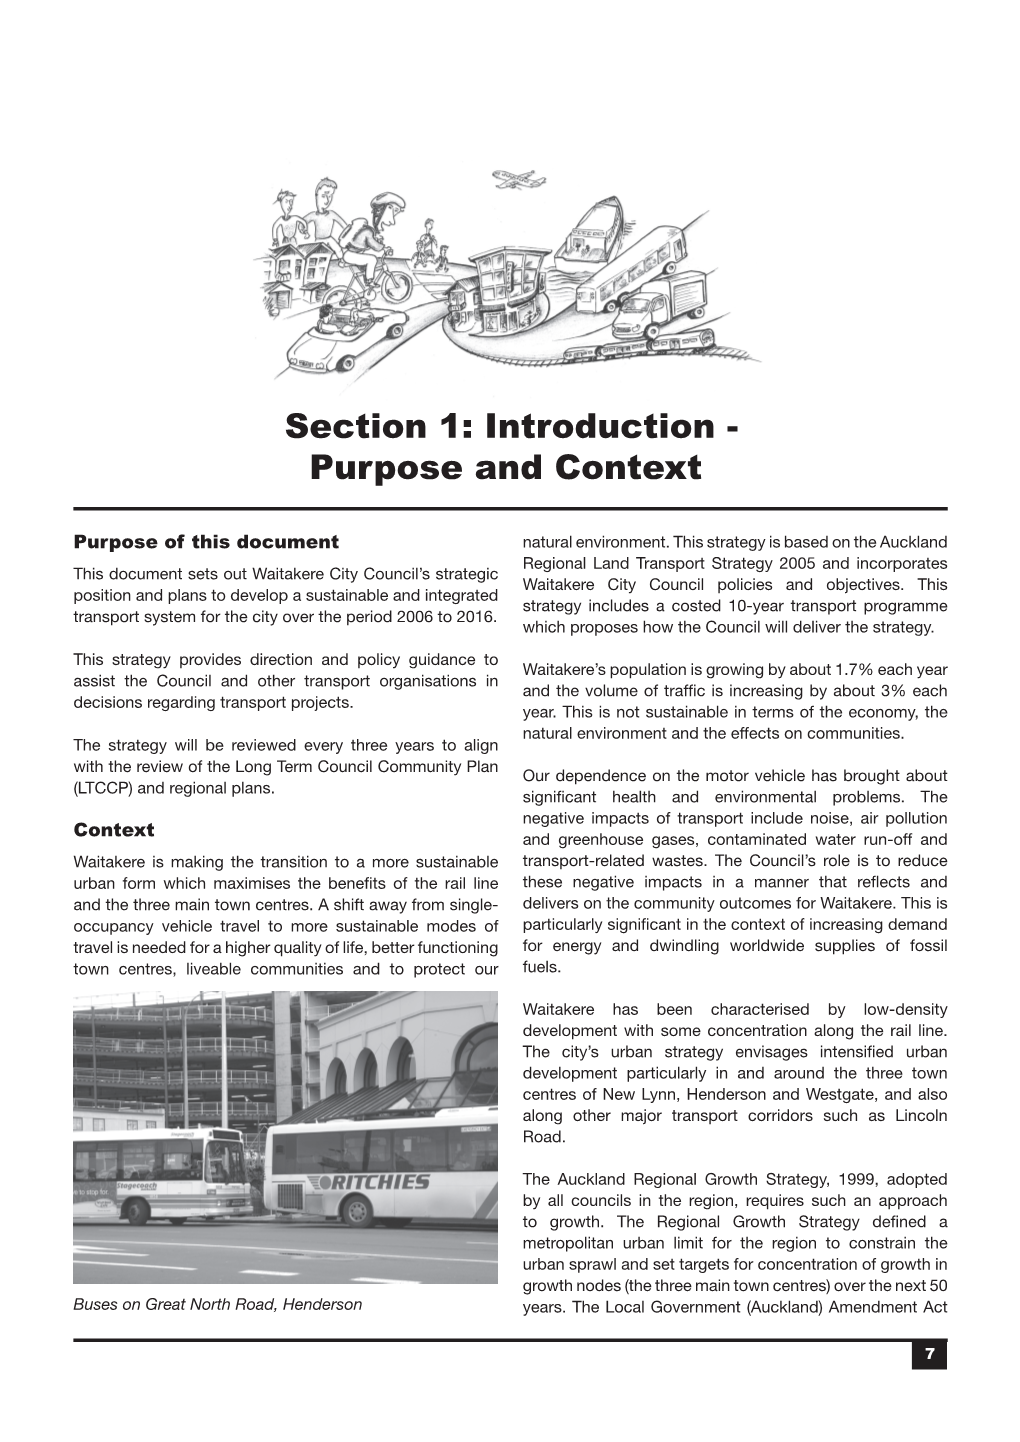 Section 1: Introduction - Purpose and Context